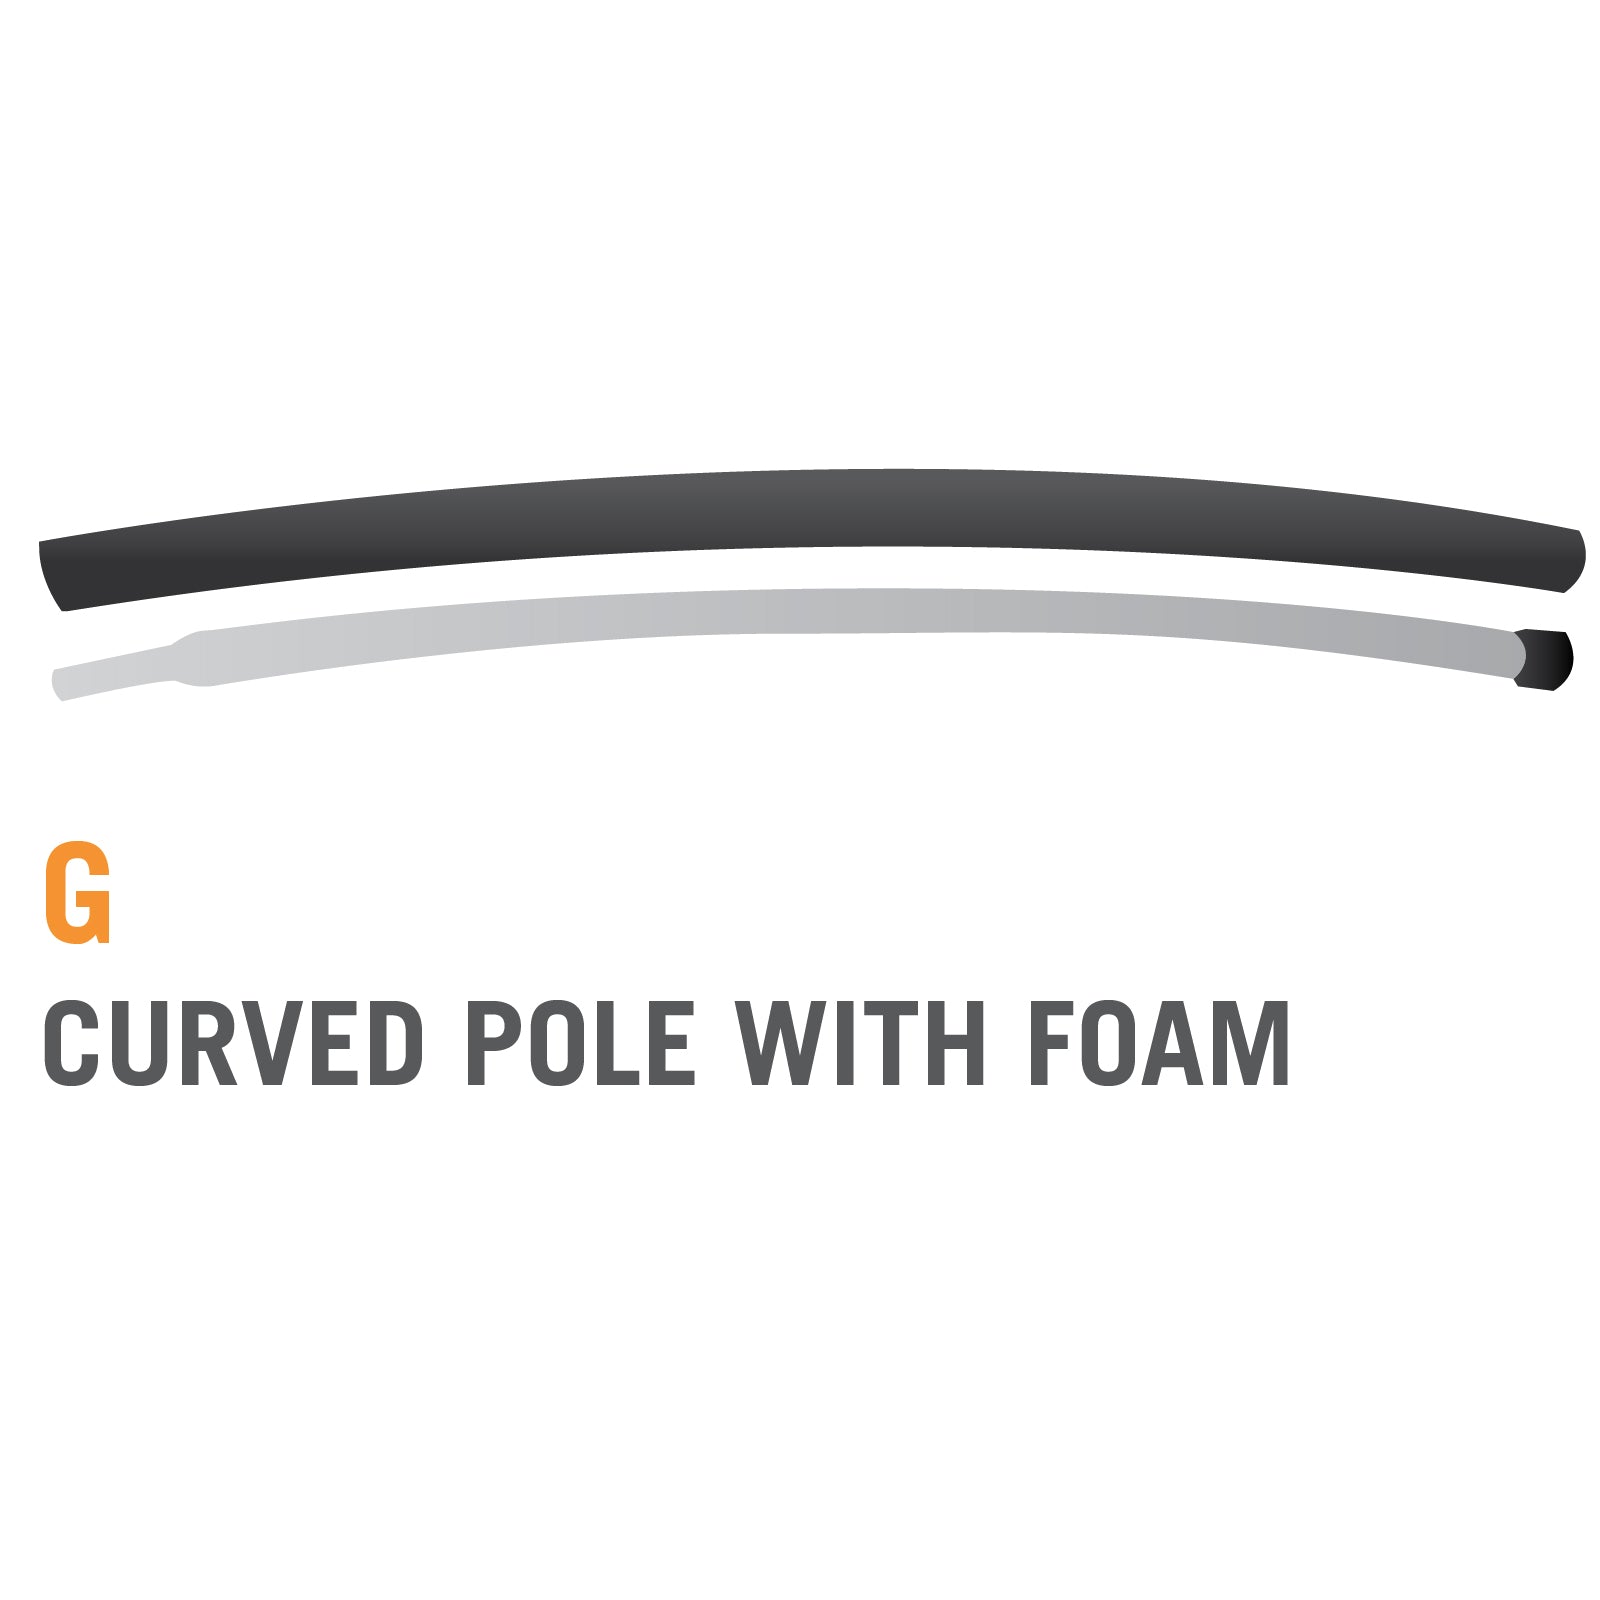 Upper Pole for 8 foot Atmos Trampoline - Black (Part G).